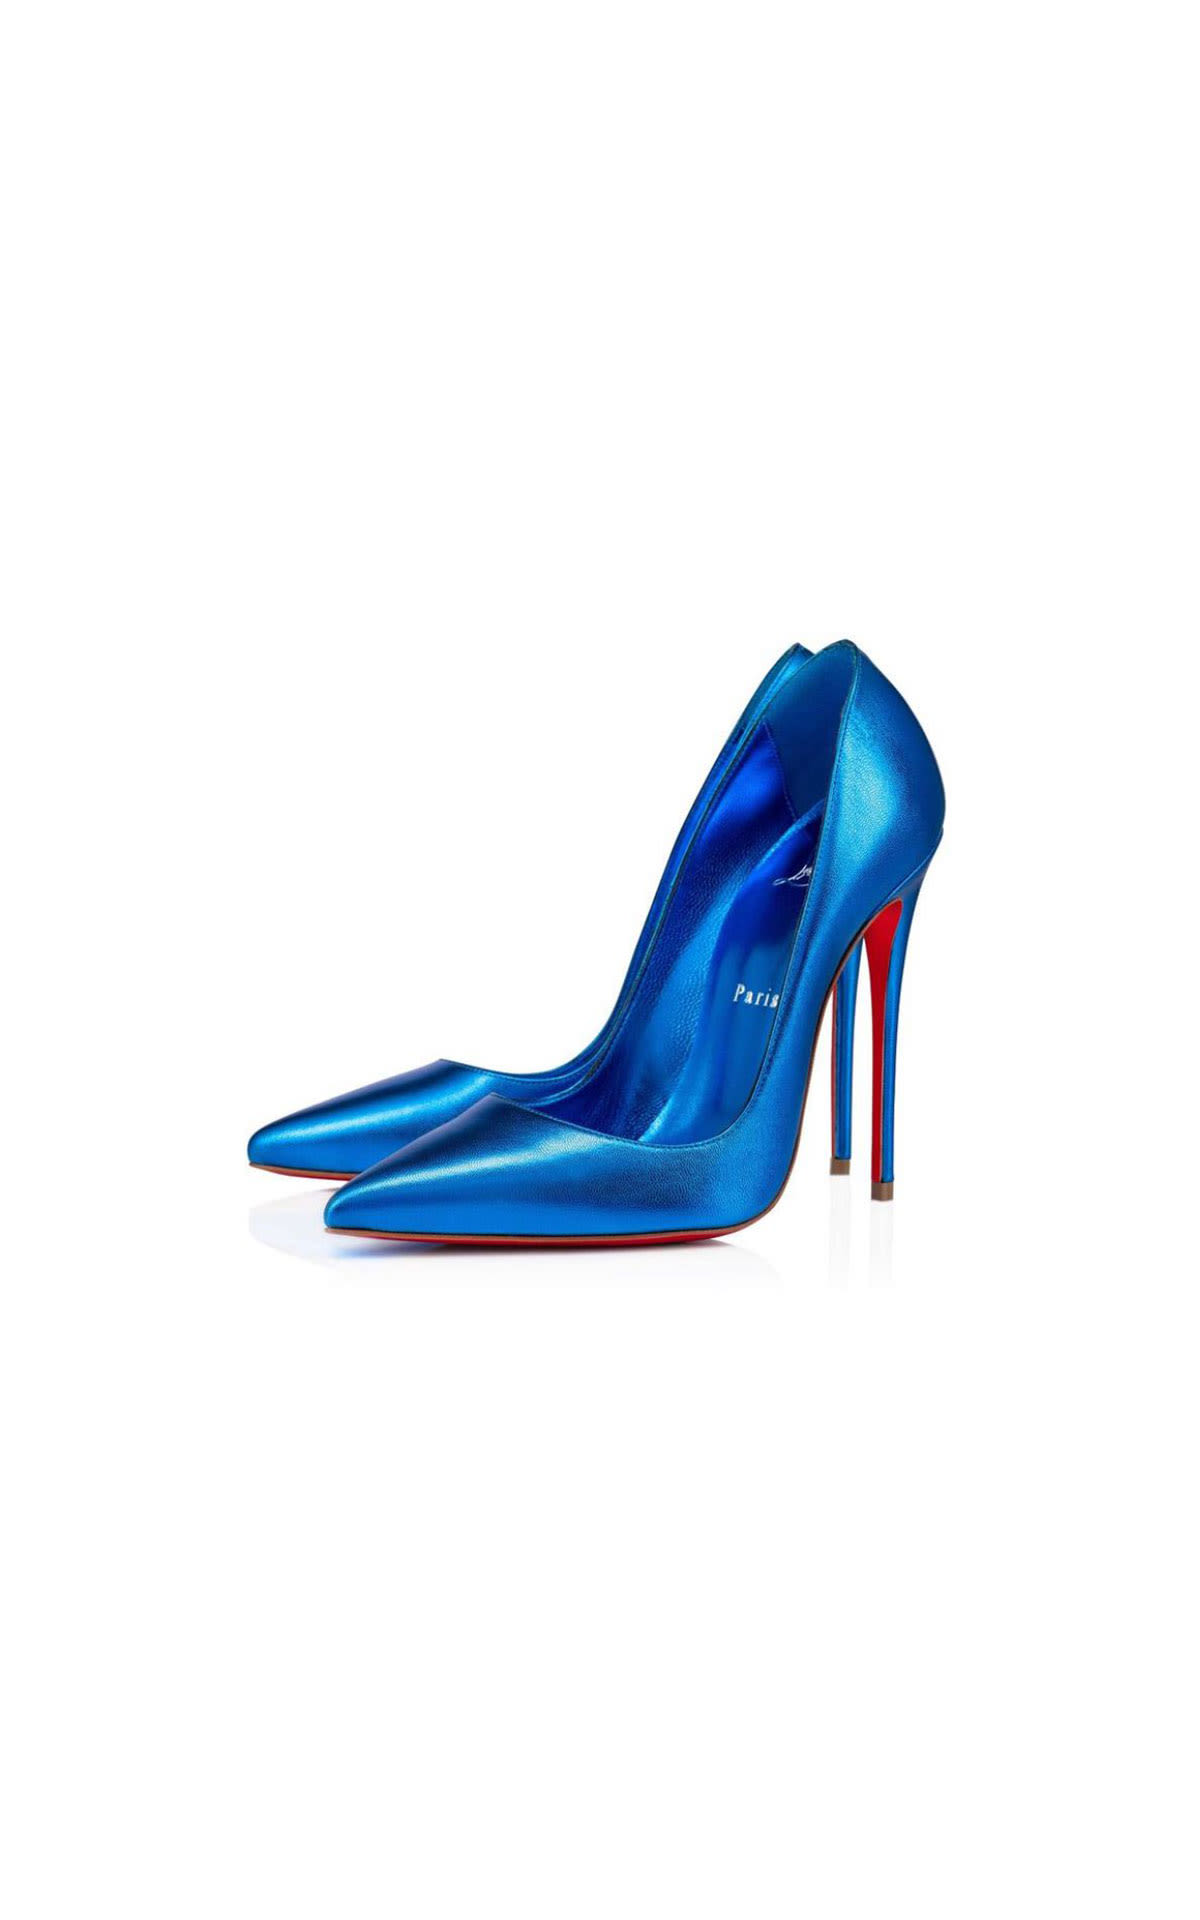 Christian Louboutin So Kate 120mm pumps from Bicester Village